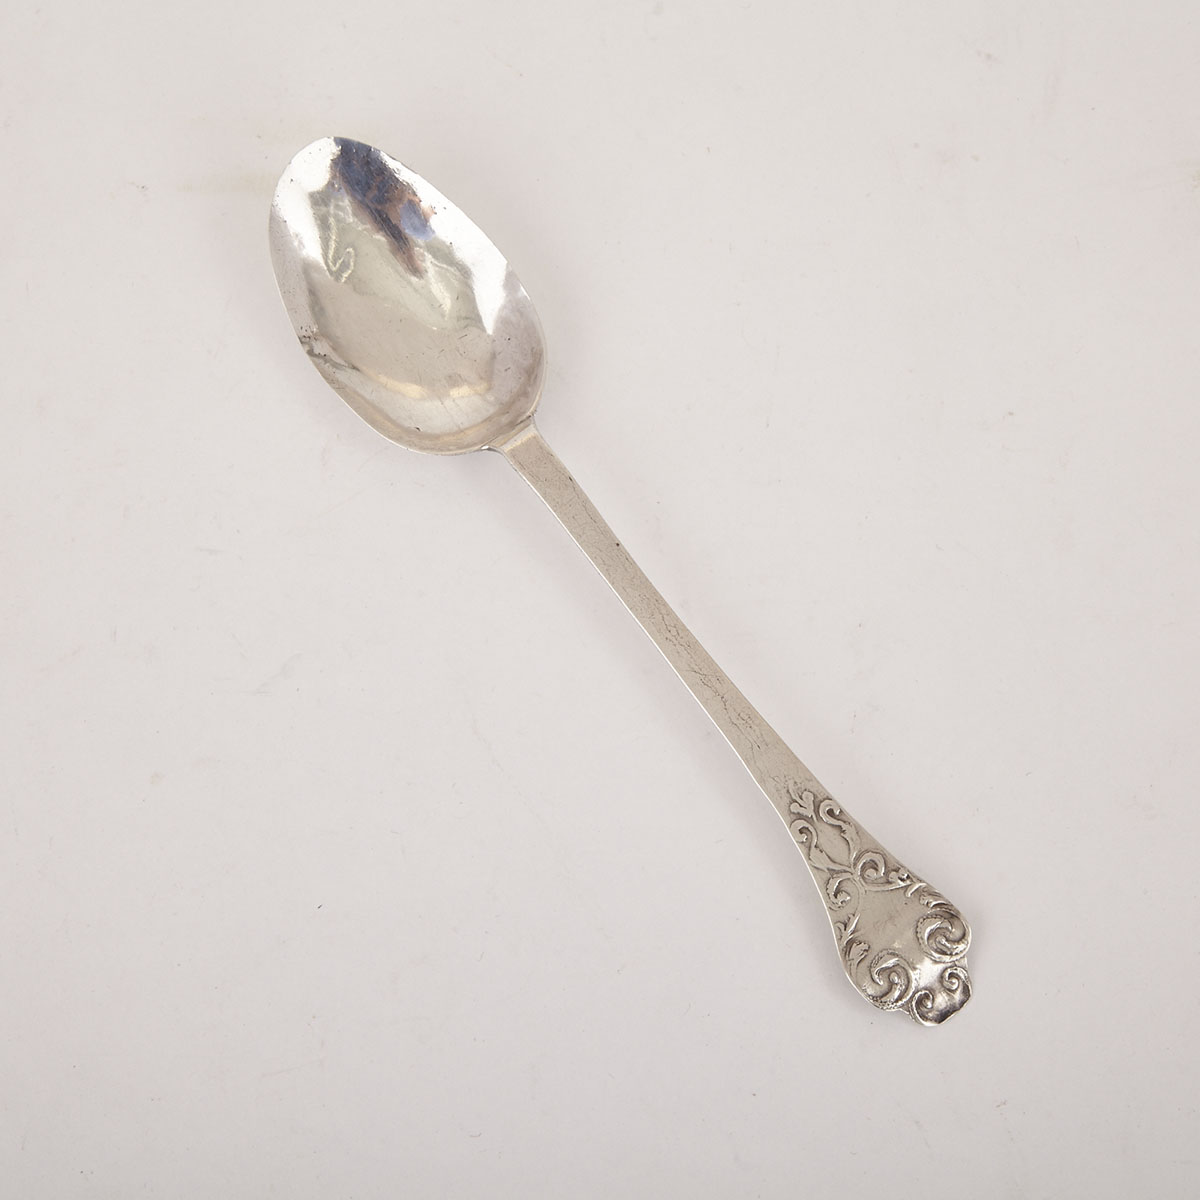 Late 17th Century English Silver Lace-Back Trefid Spoon, c.1680-90